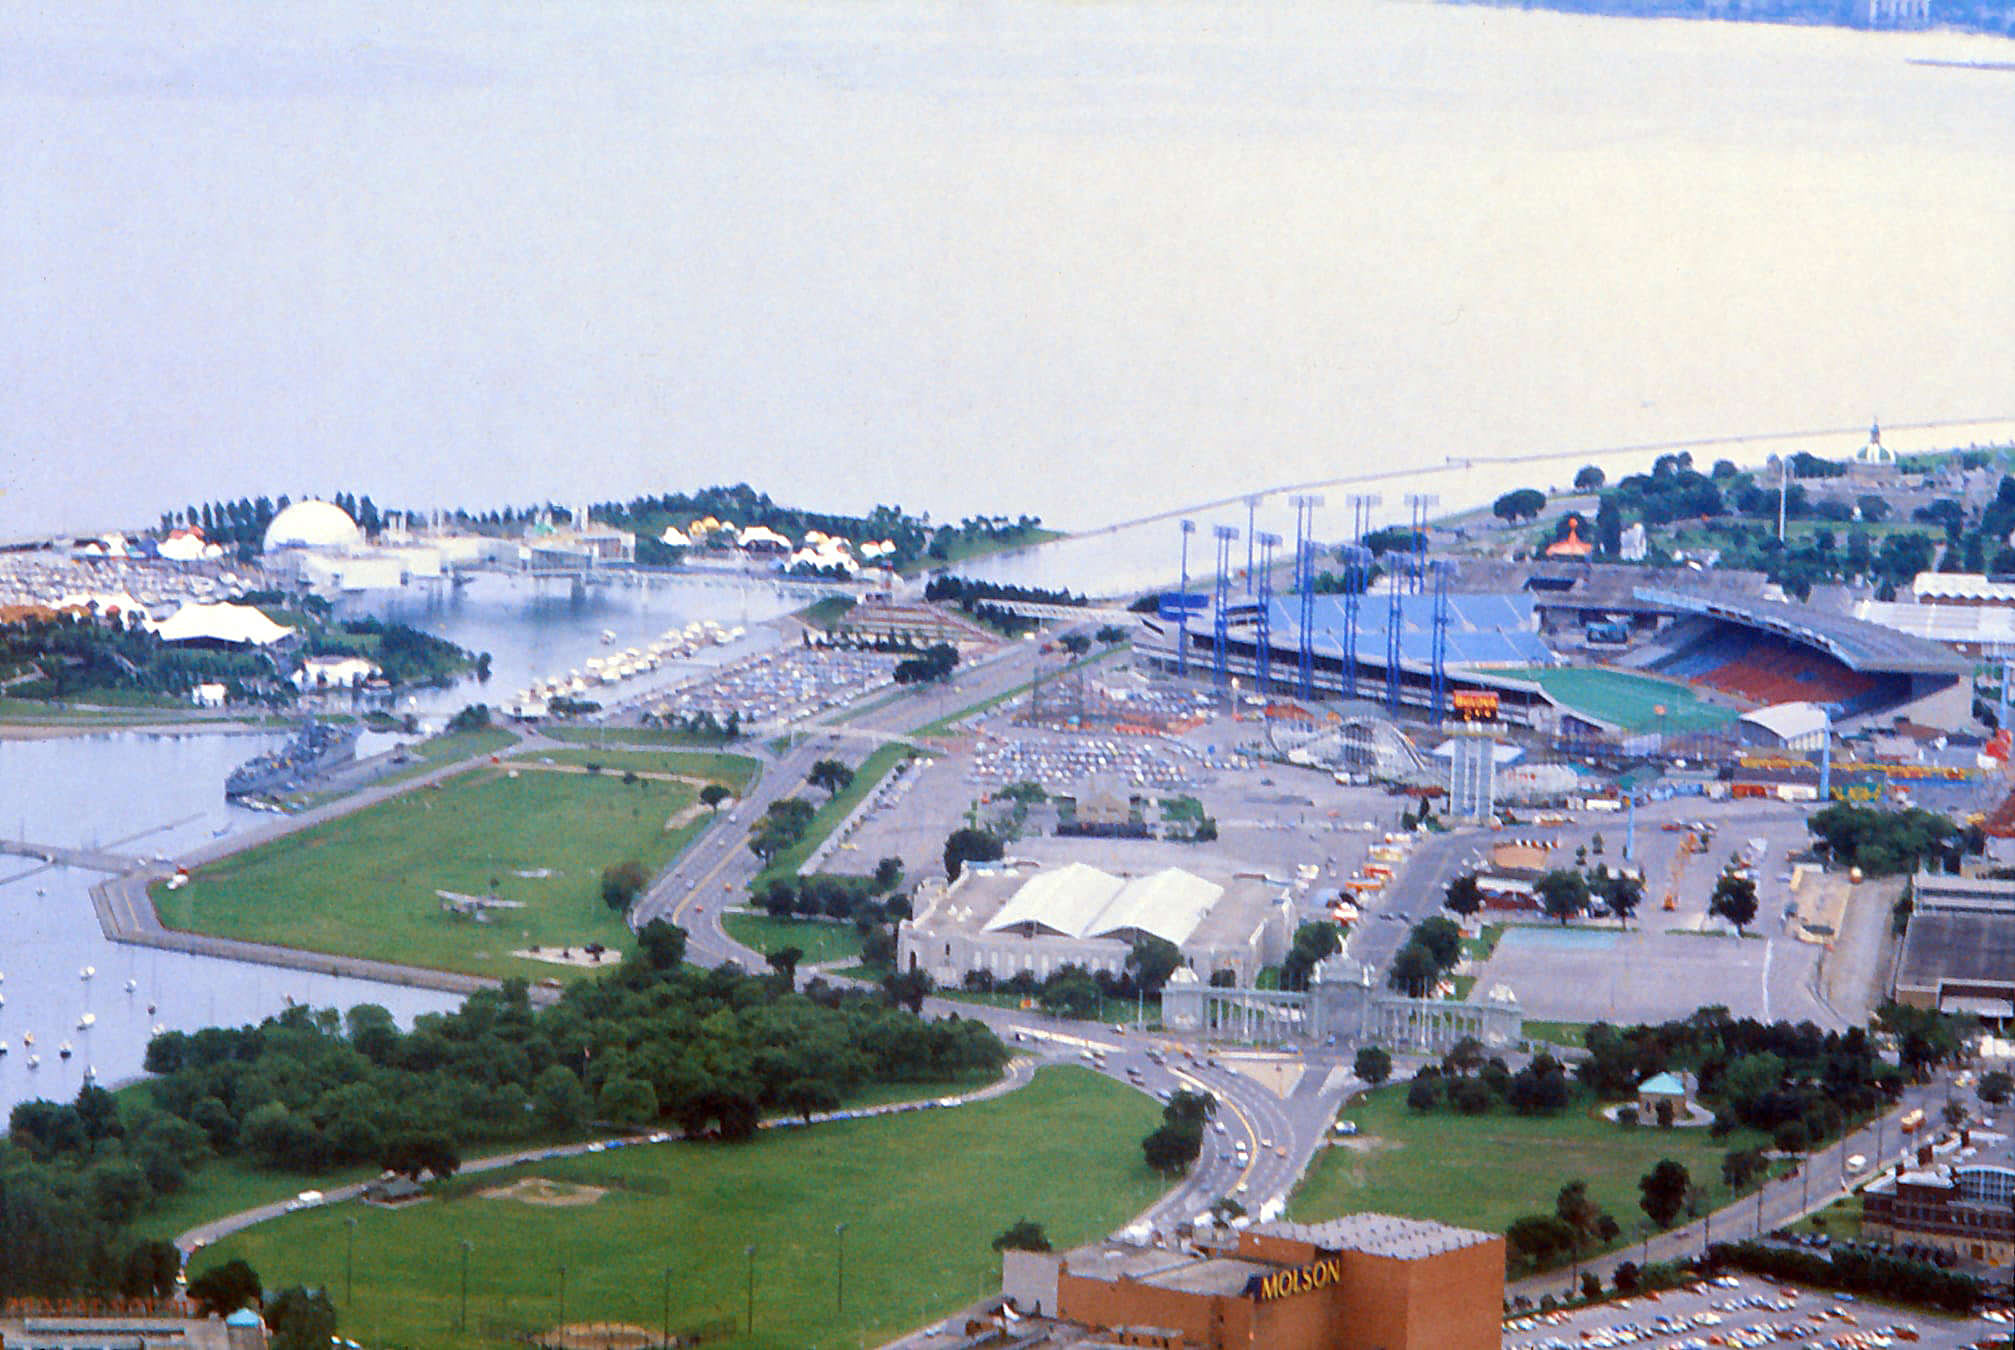 CNE view from CN Tower, in the 1970s.